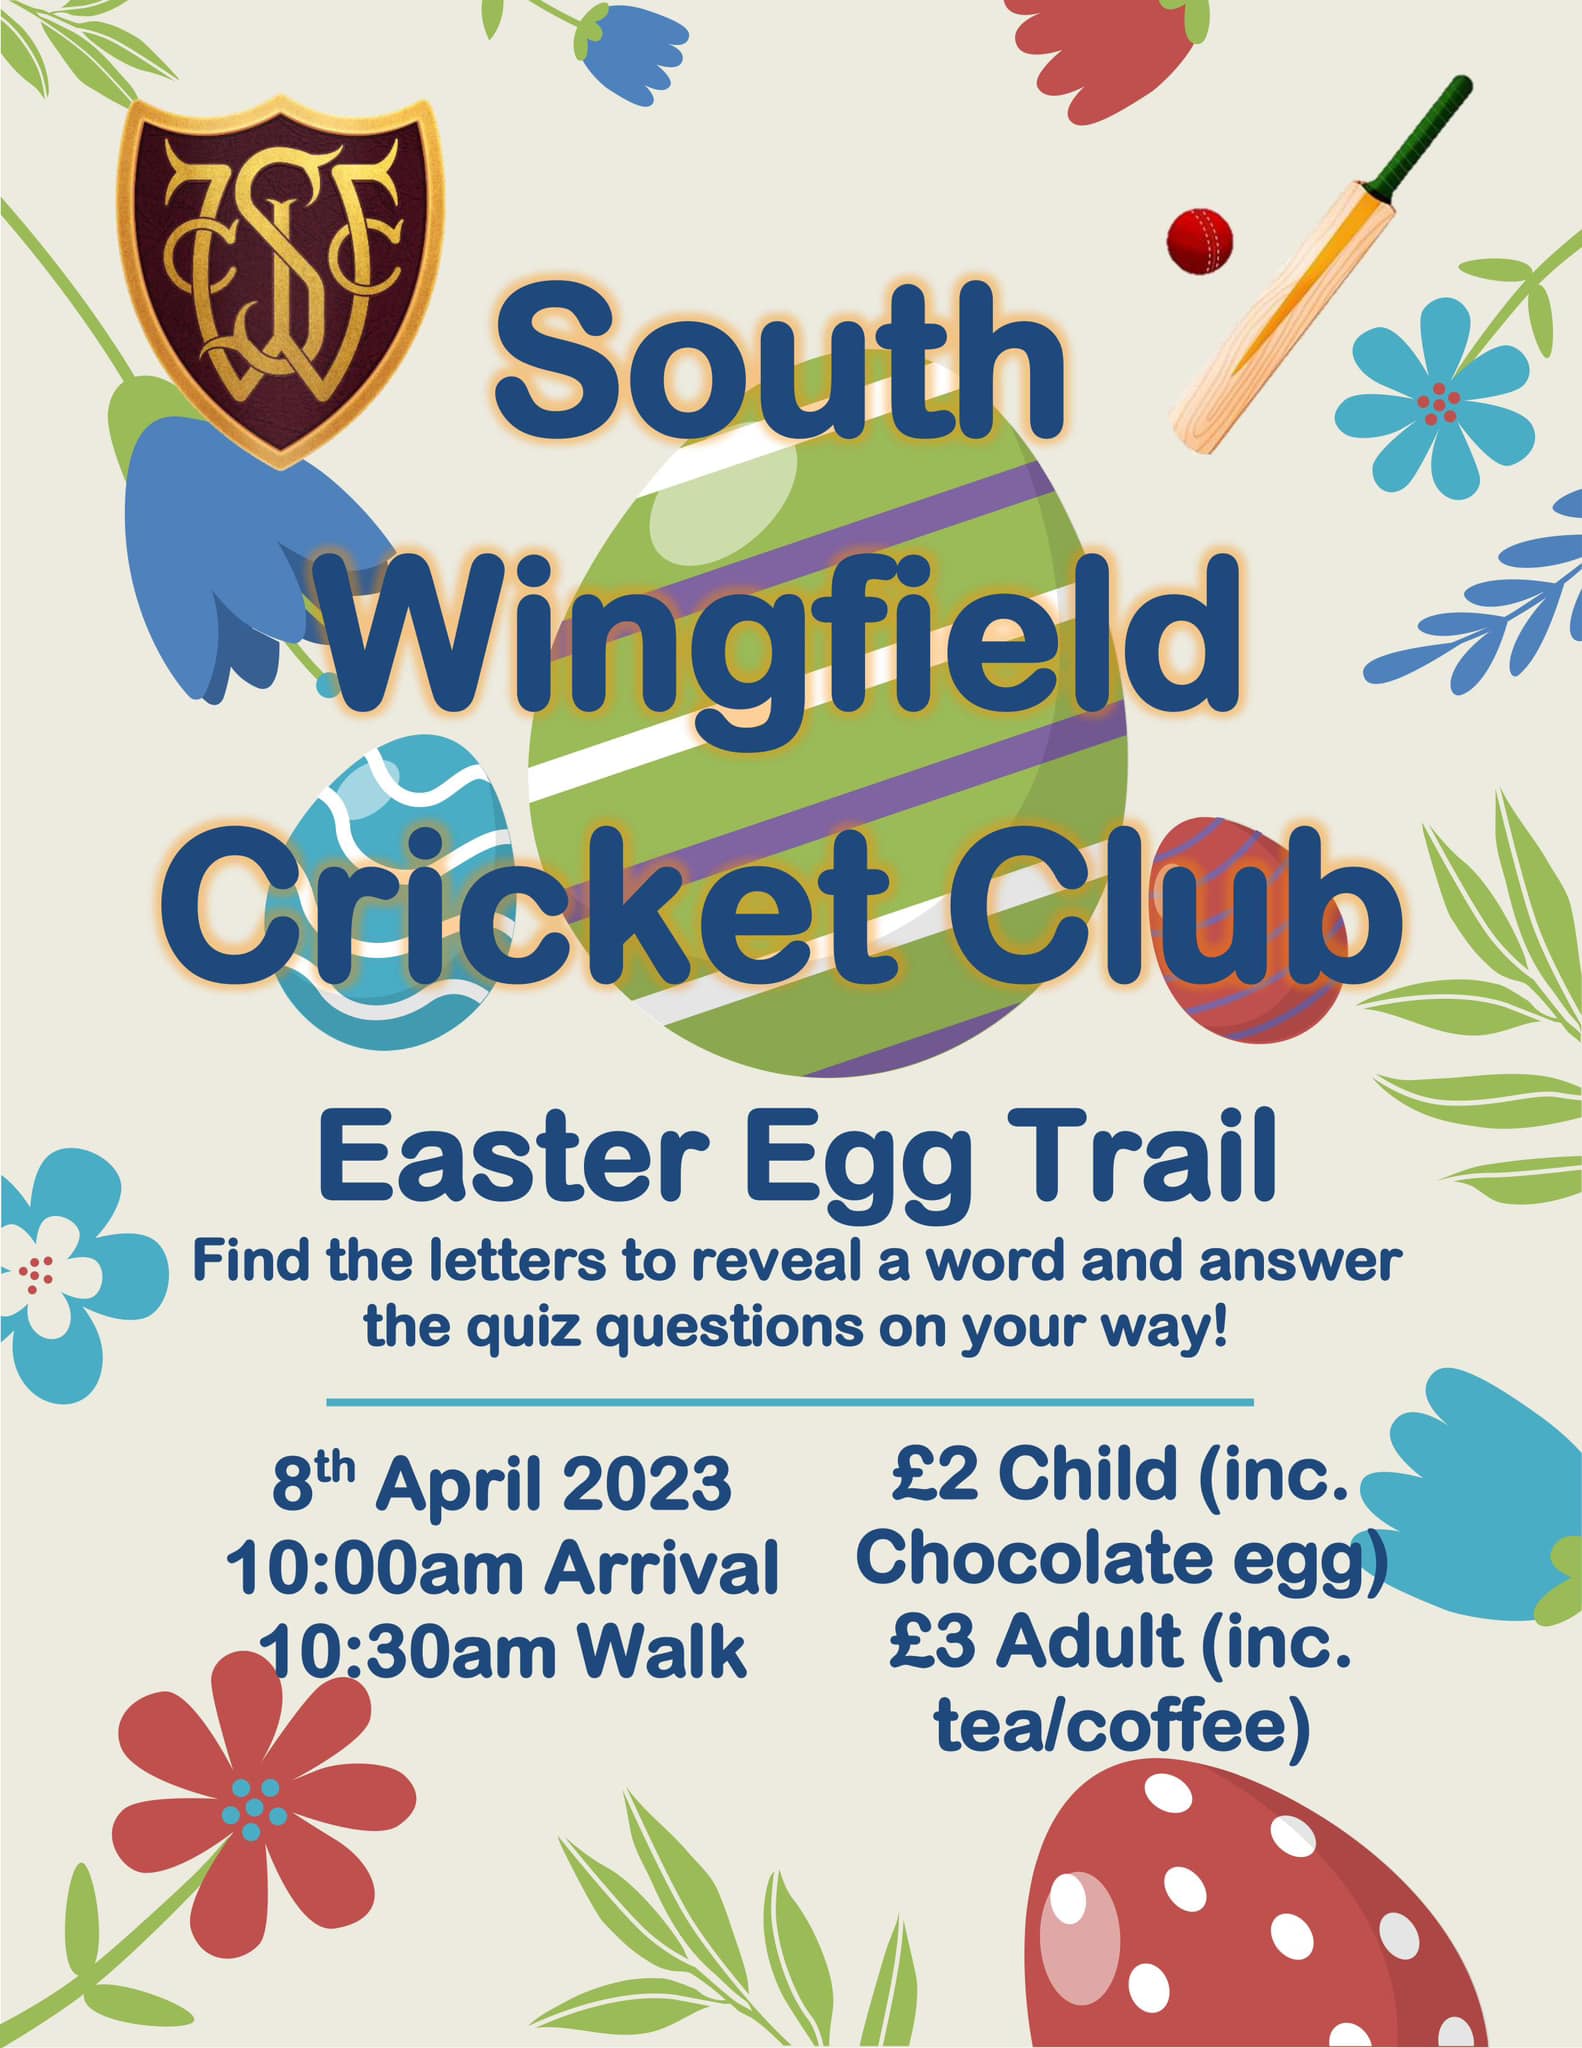 South Wingfield Cricket Club will host an Easter Egg Trail on April 8